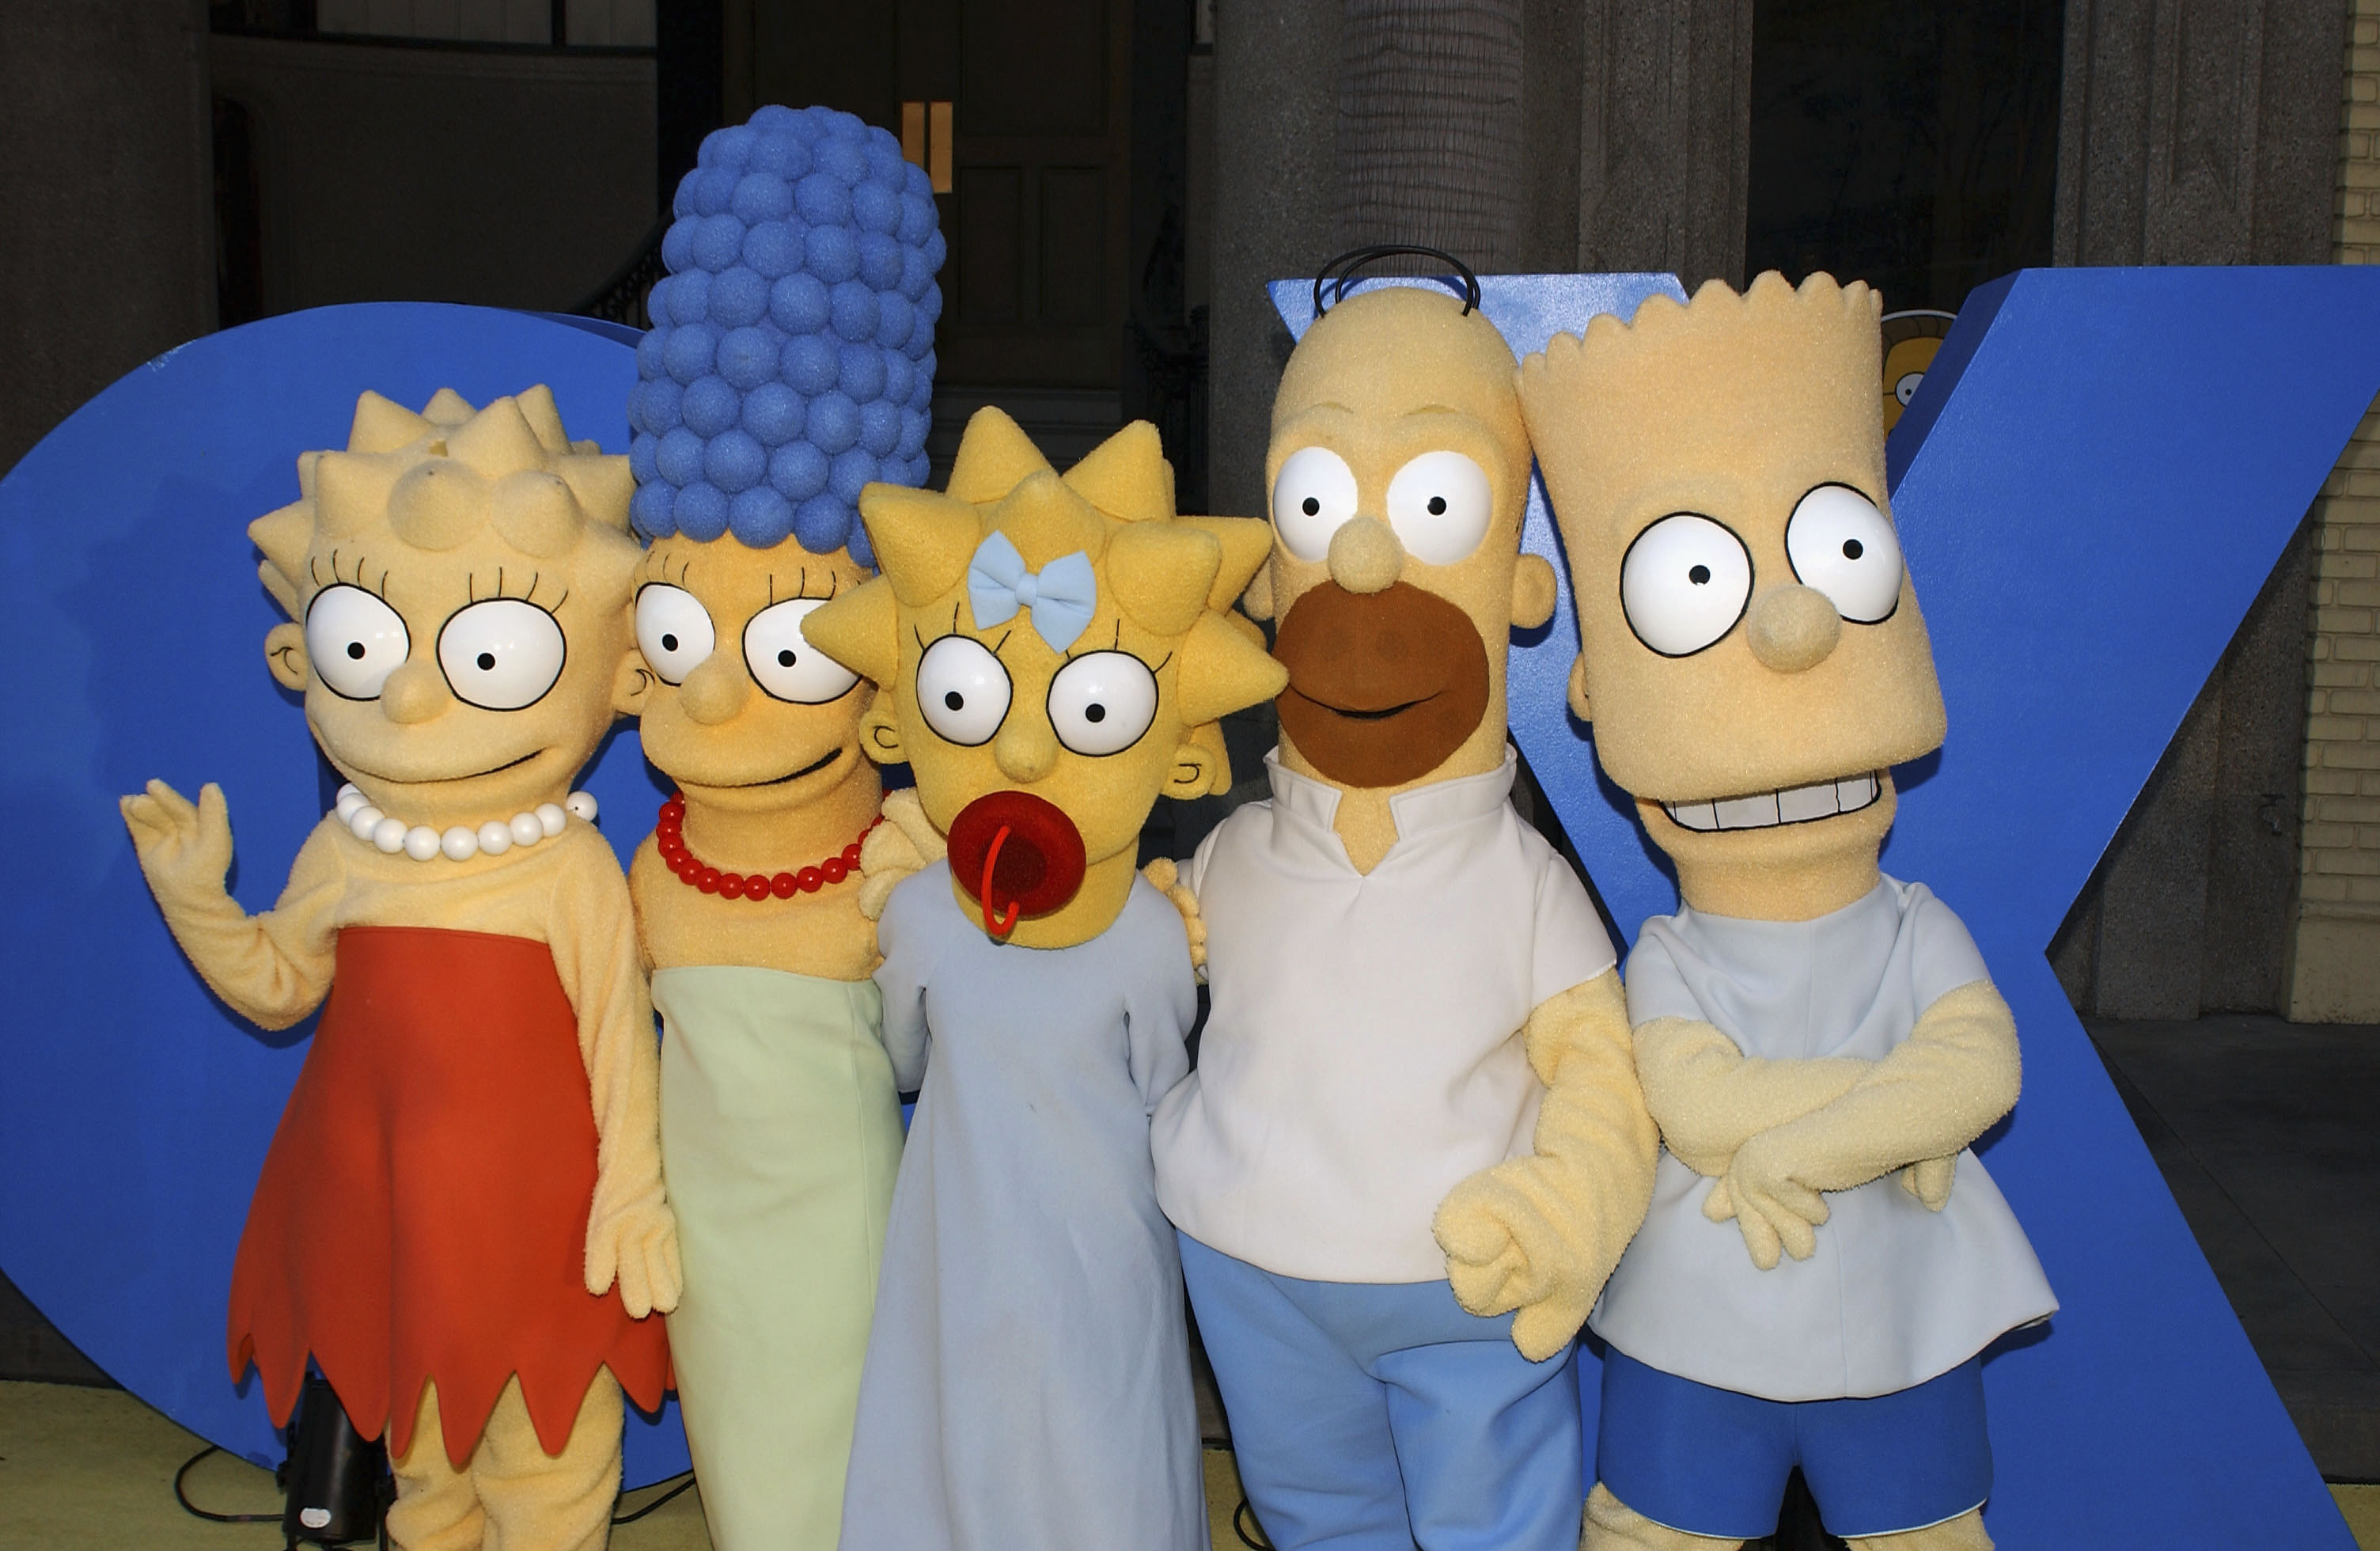 Lisa, Marge, Maggie, Homer and Bart Simpson pose for a photograph at "The Simpsons" 350th episode block party